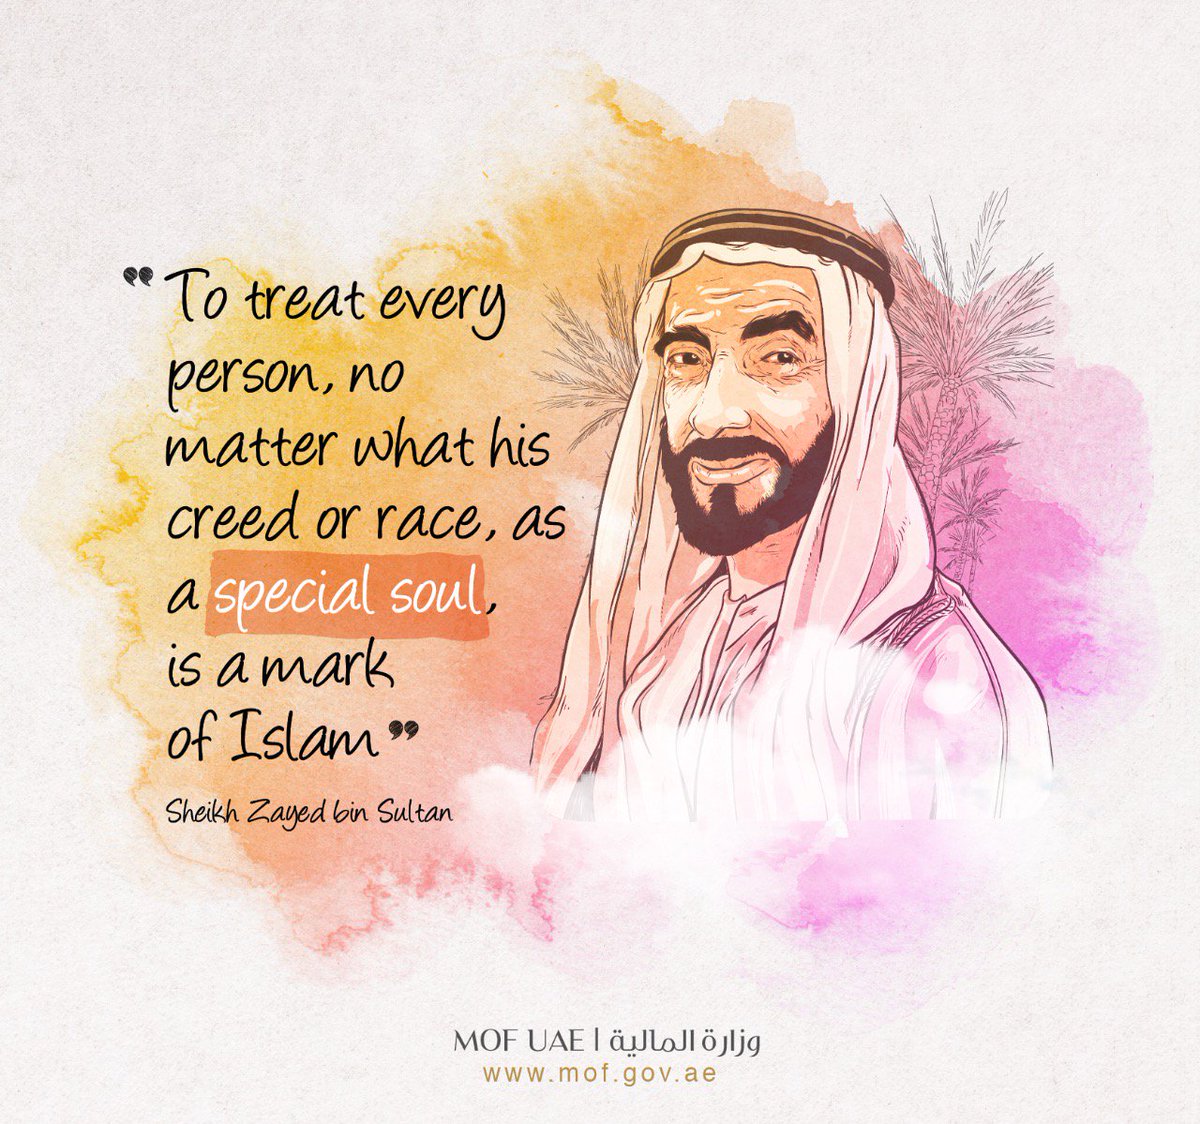 We invite you to reflect on the values of #tolerance that shaped the thinking & approach of #SheikhZayed bin Sultan, may his soul rest in peace. His legacy established the foundations of dialogue and openness to different cultures.

#Socialdiversity #YearofTolerance #UAE #mofuae